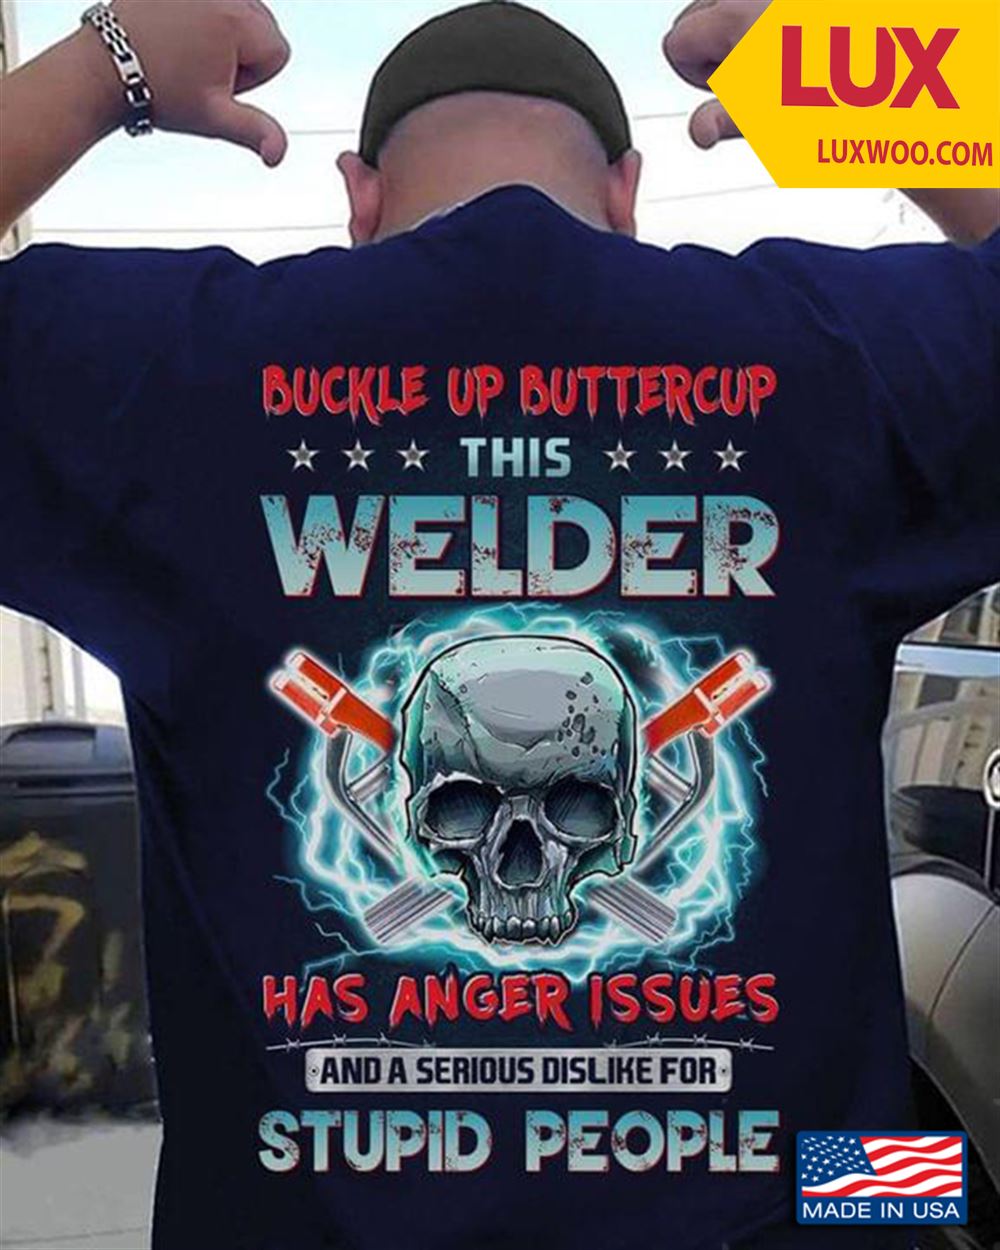 Buckle Up Buttercup This Weler Has Anger Issues And A Serious Dislike For Stupid Peole Tshirt Size Up To 5xl